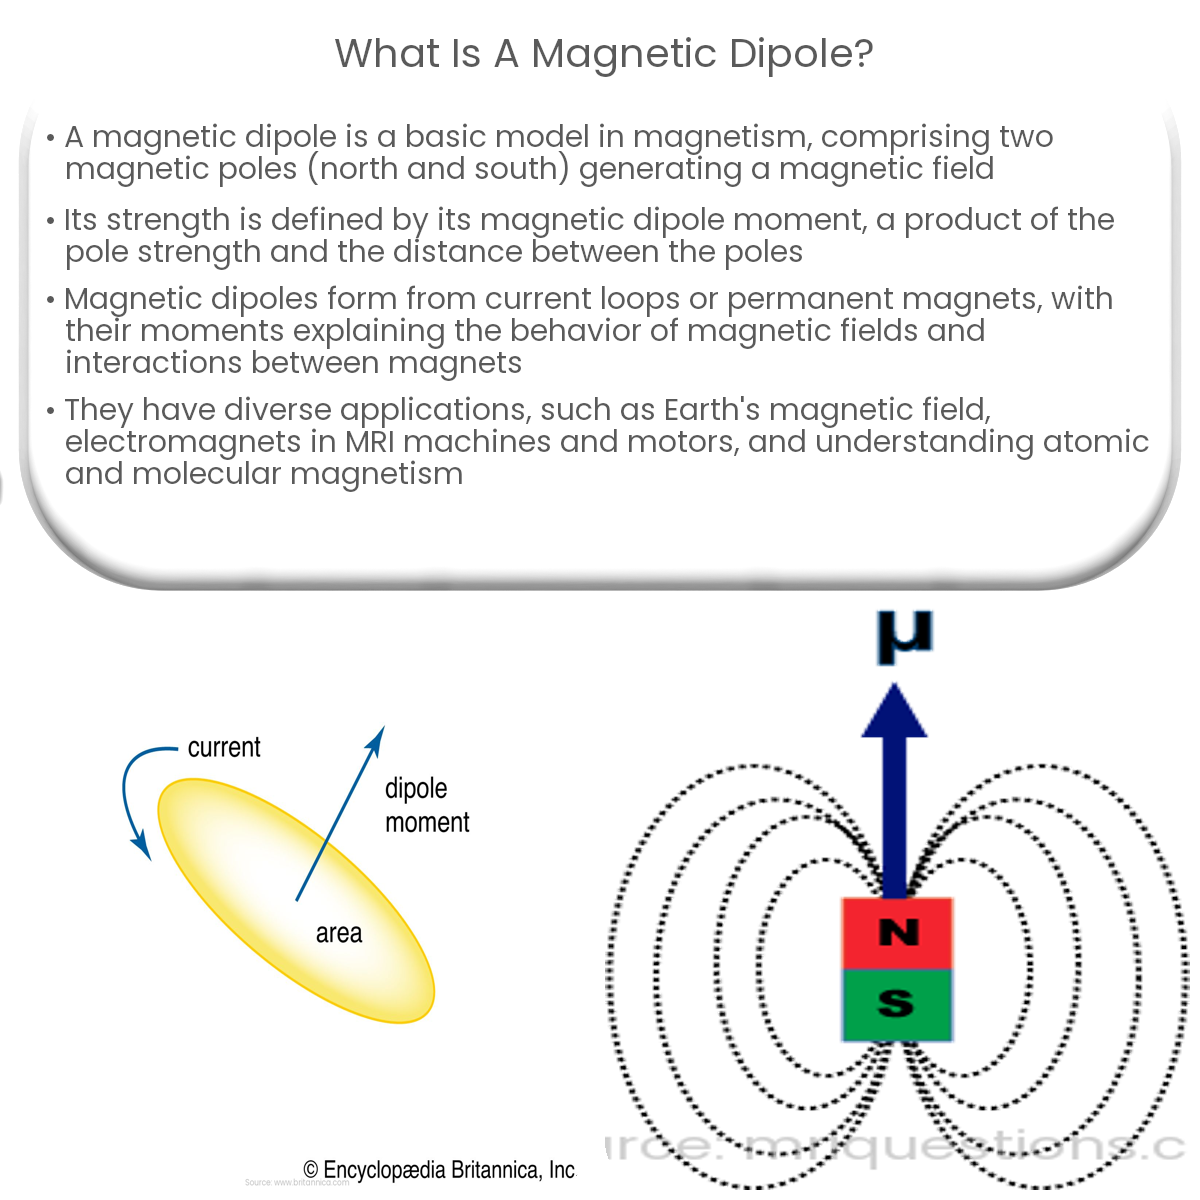 What is a magnetic dipole?